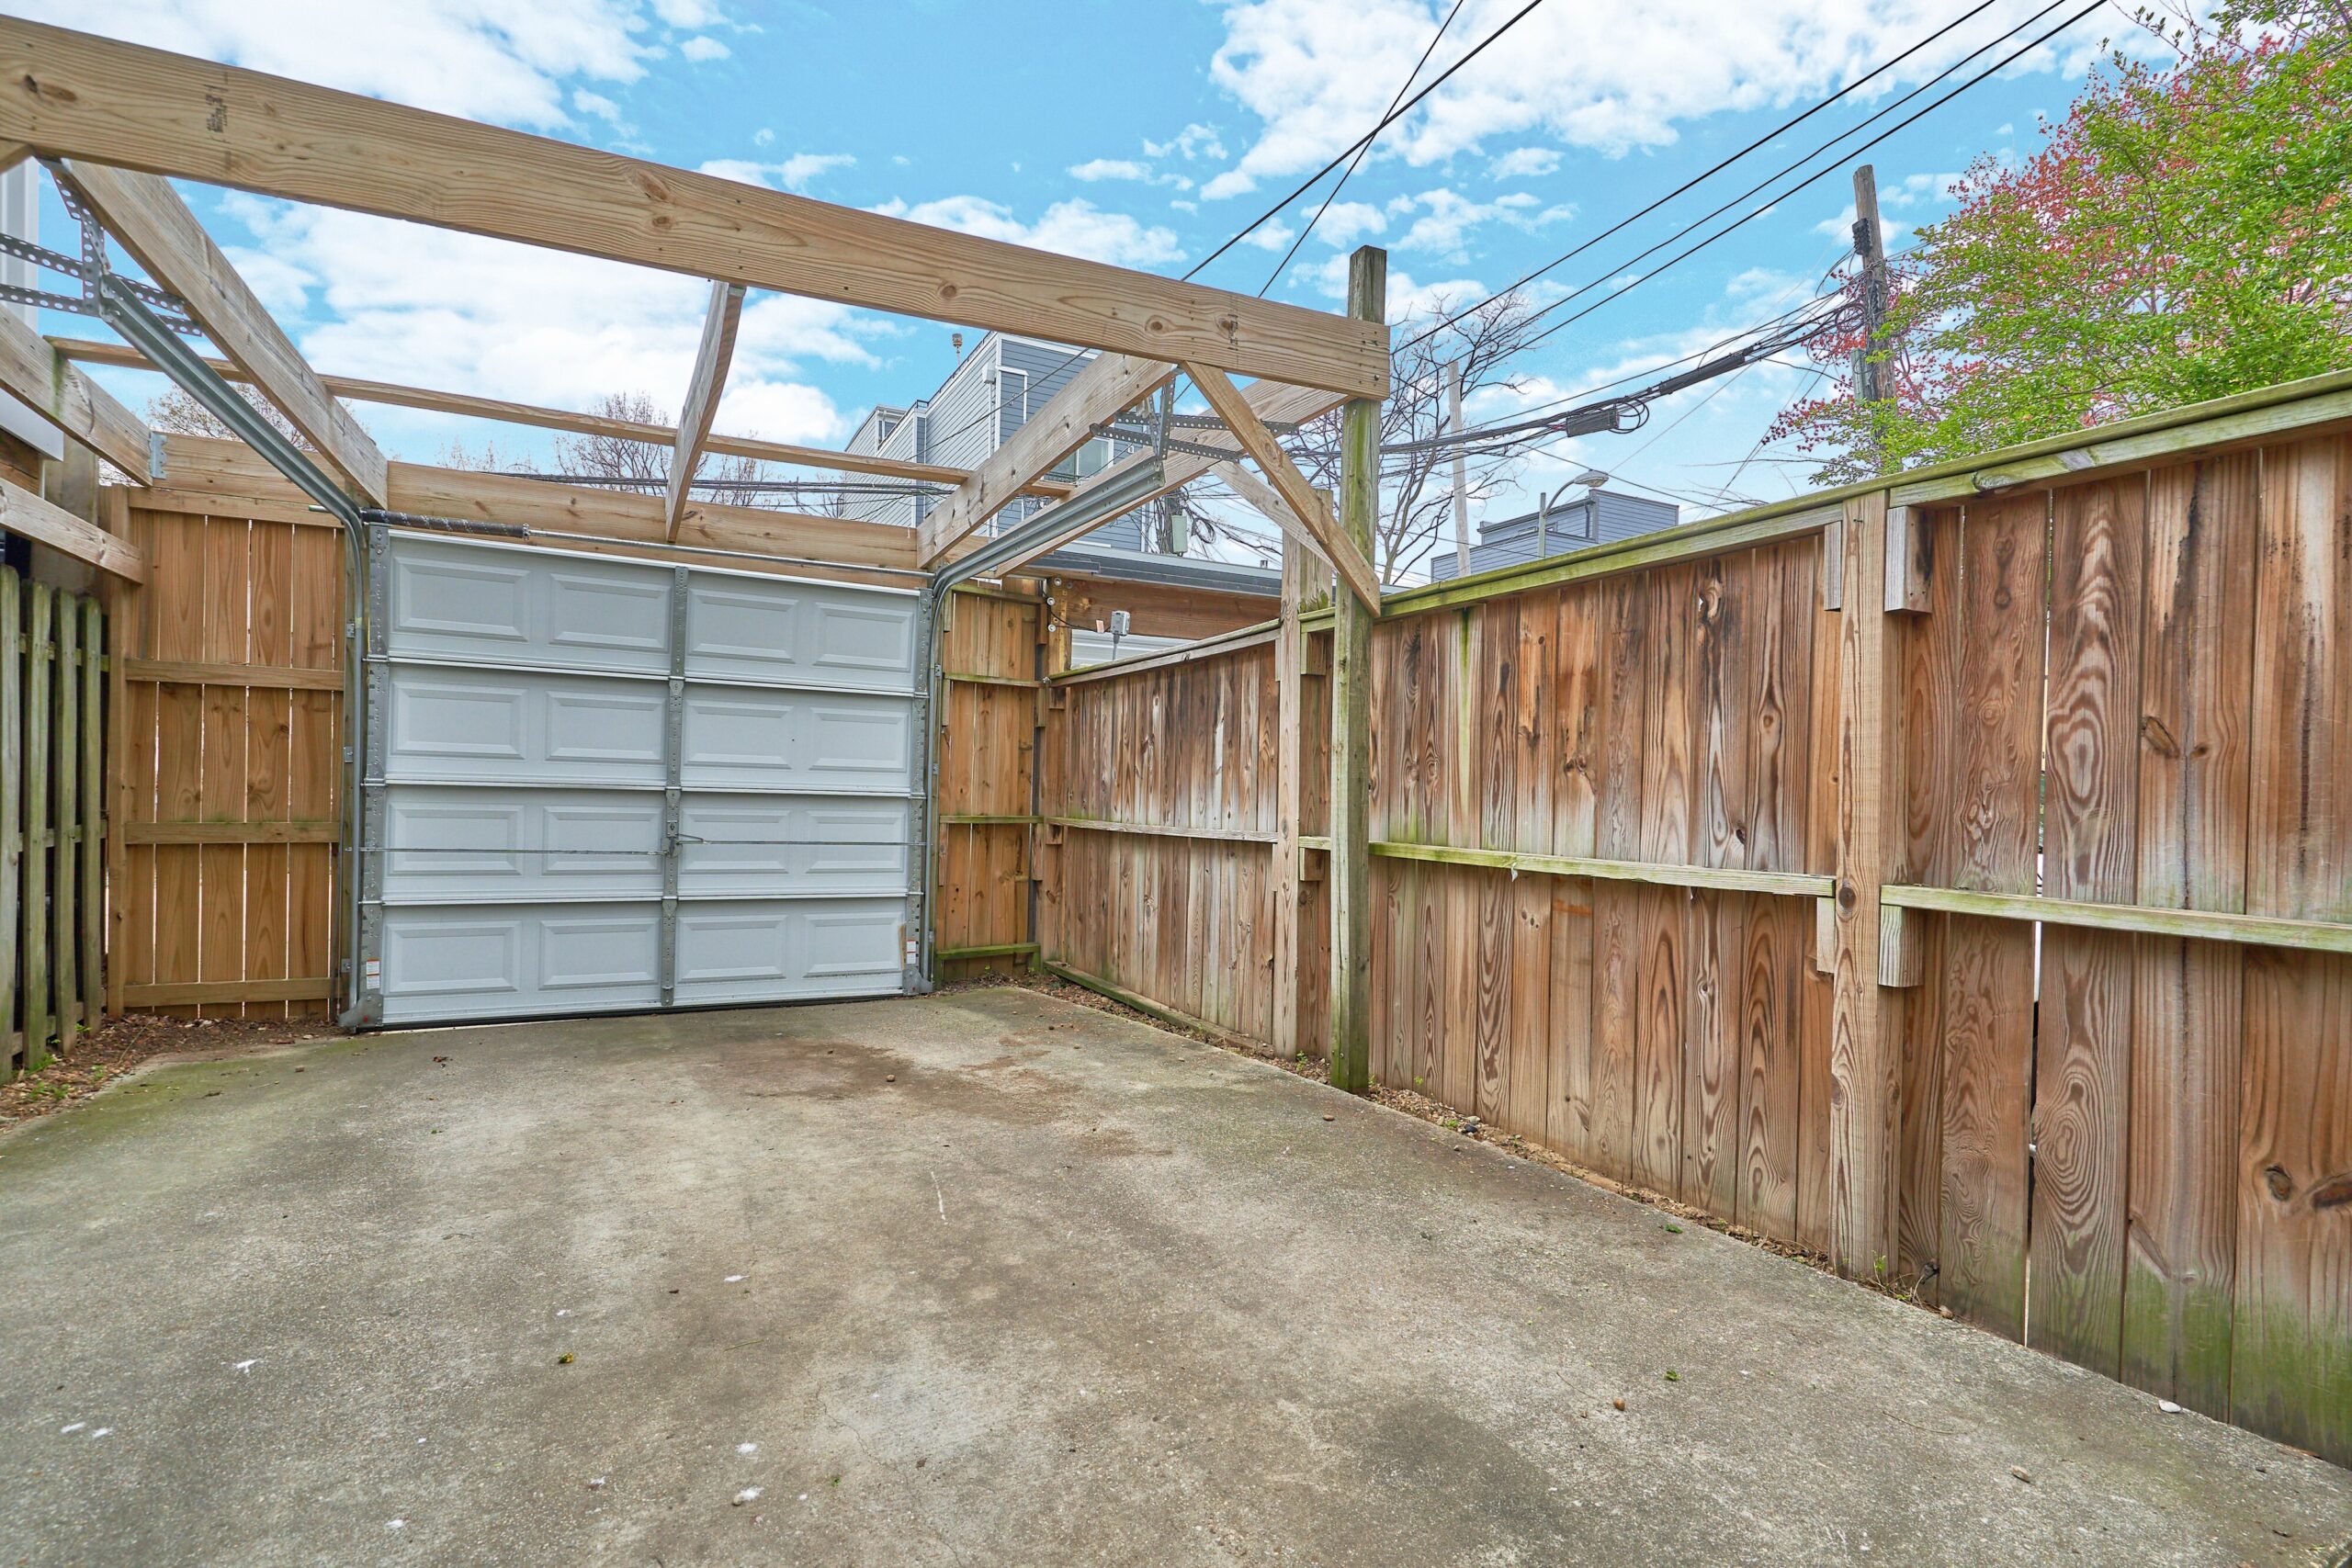 Professional exterior photo of 1313 K Street SE, Washington, DC - showing the secured rear carport area with garage door